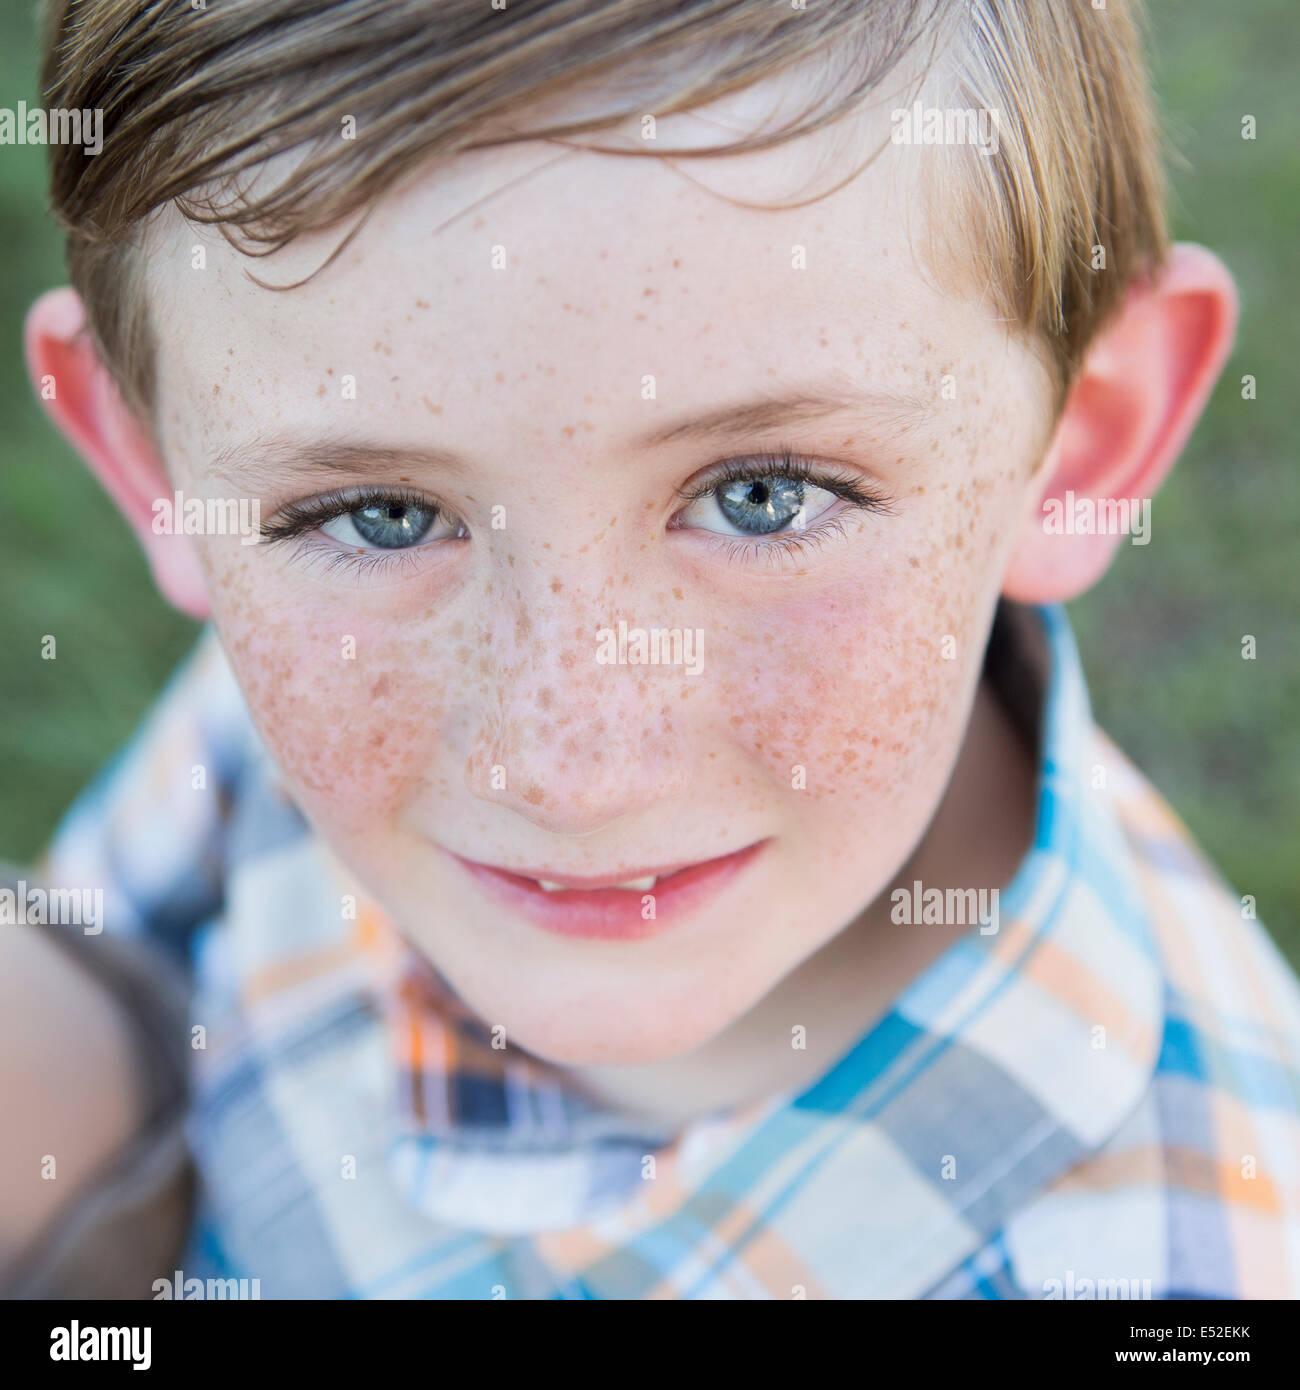 Portrait of a young boy with blue eyes and freckles on his nose. Stock Photo